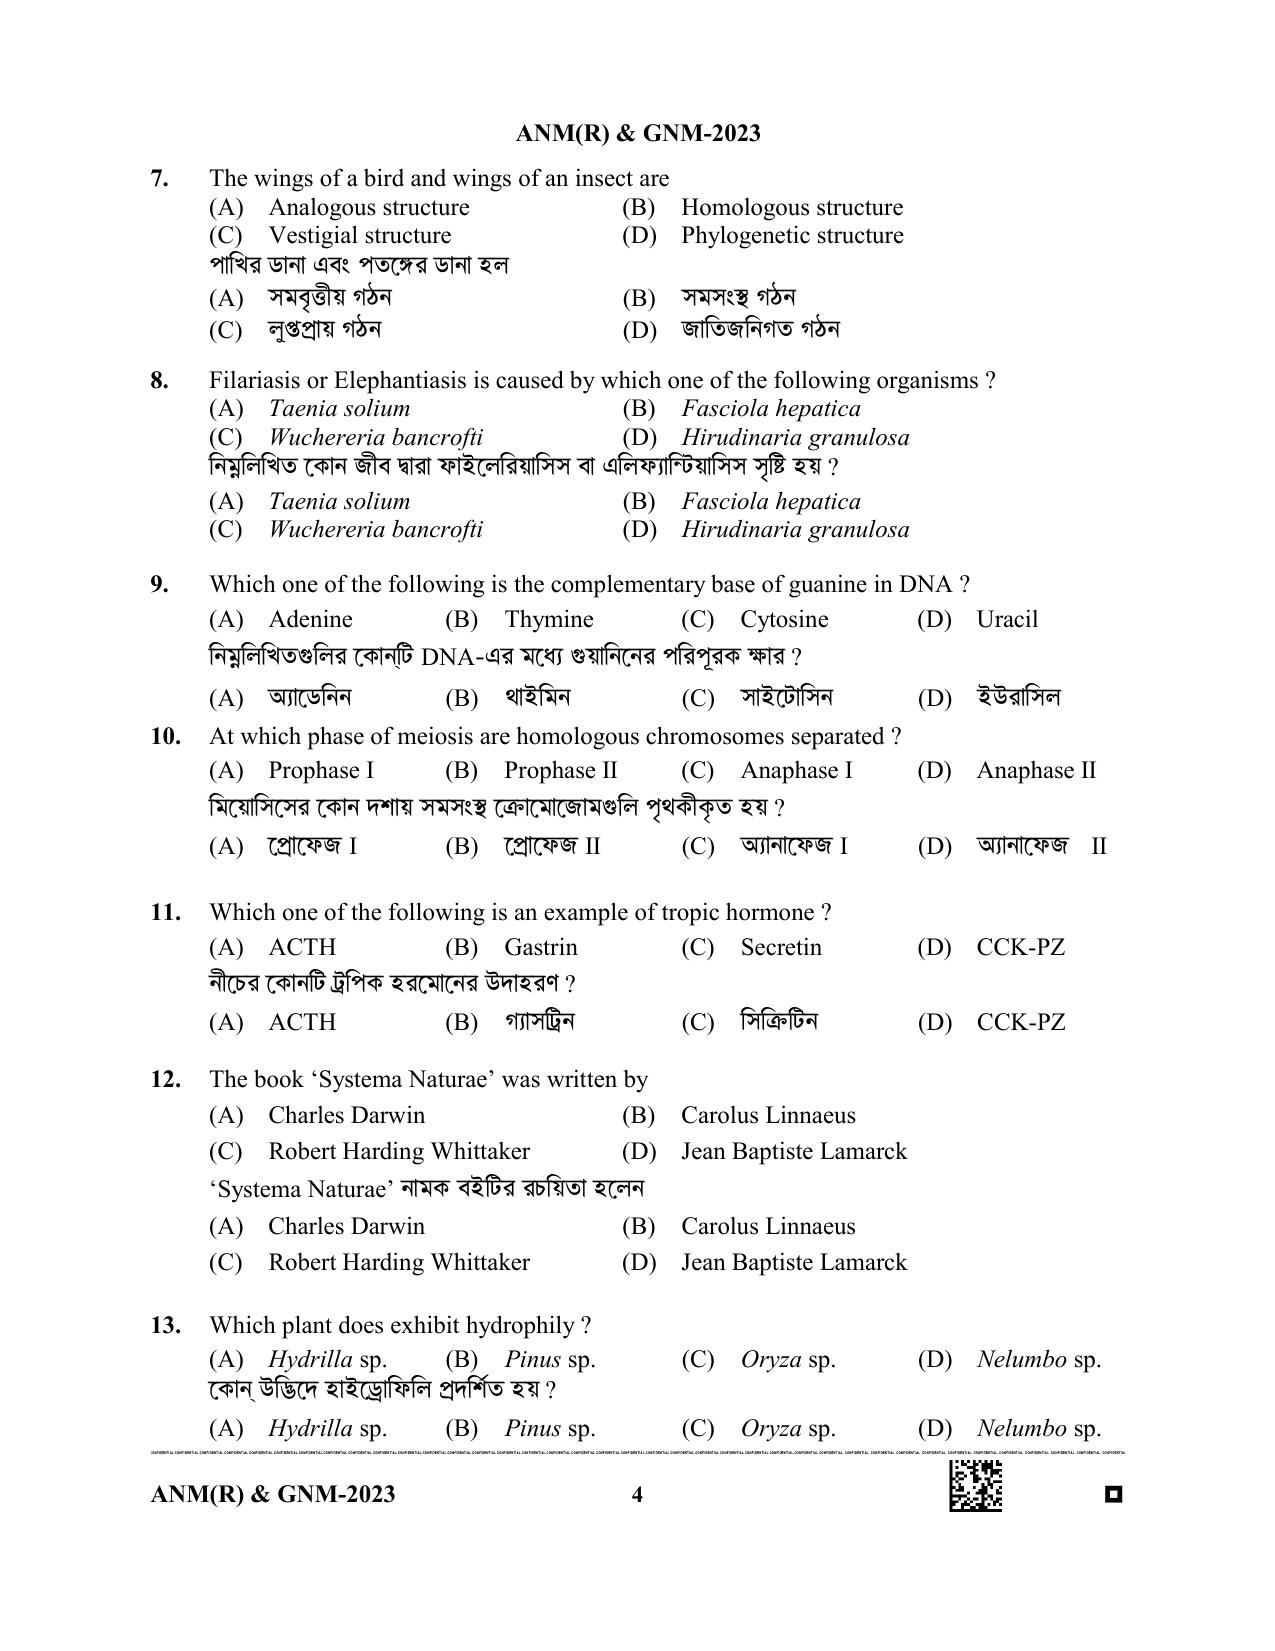 WB ANM GNM 2023 Question Paper - Page 4